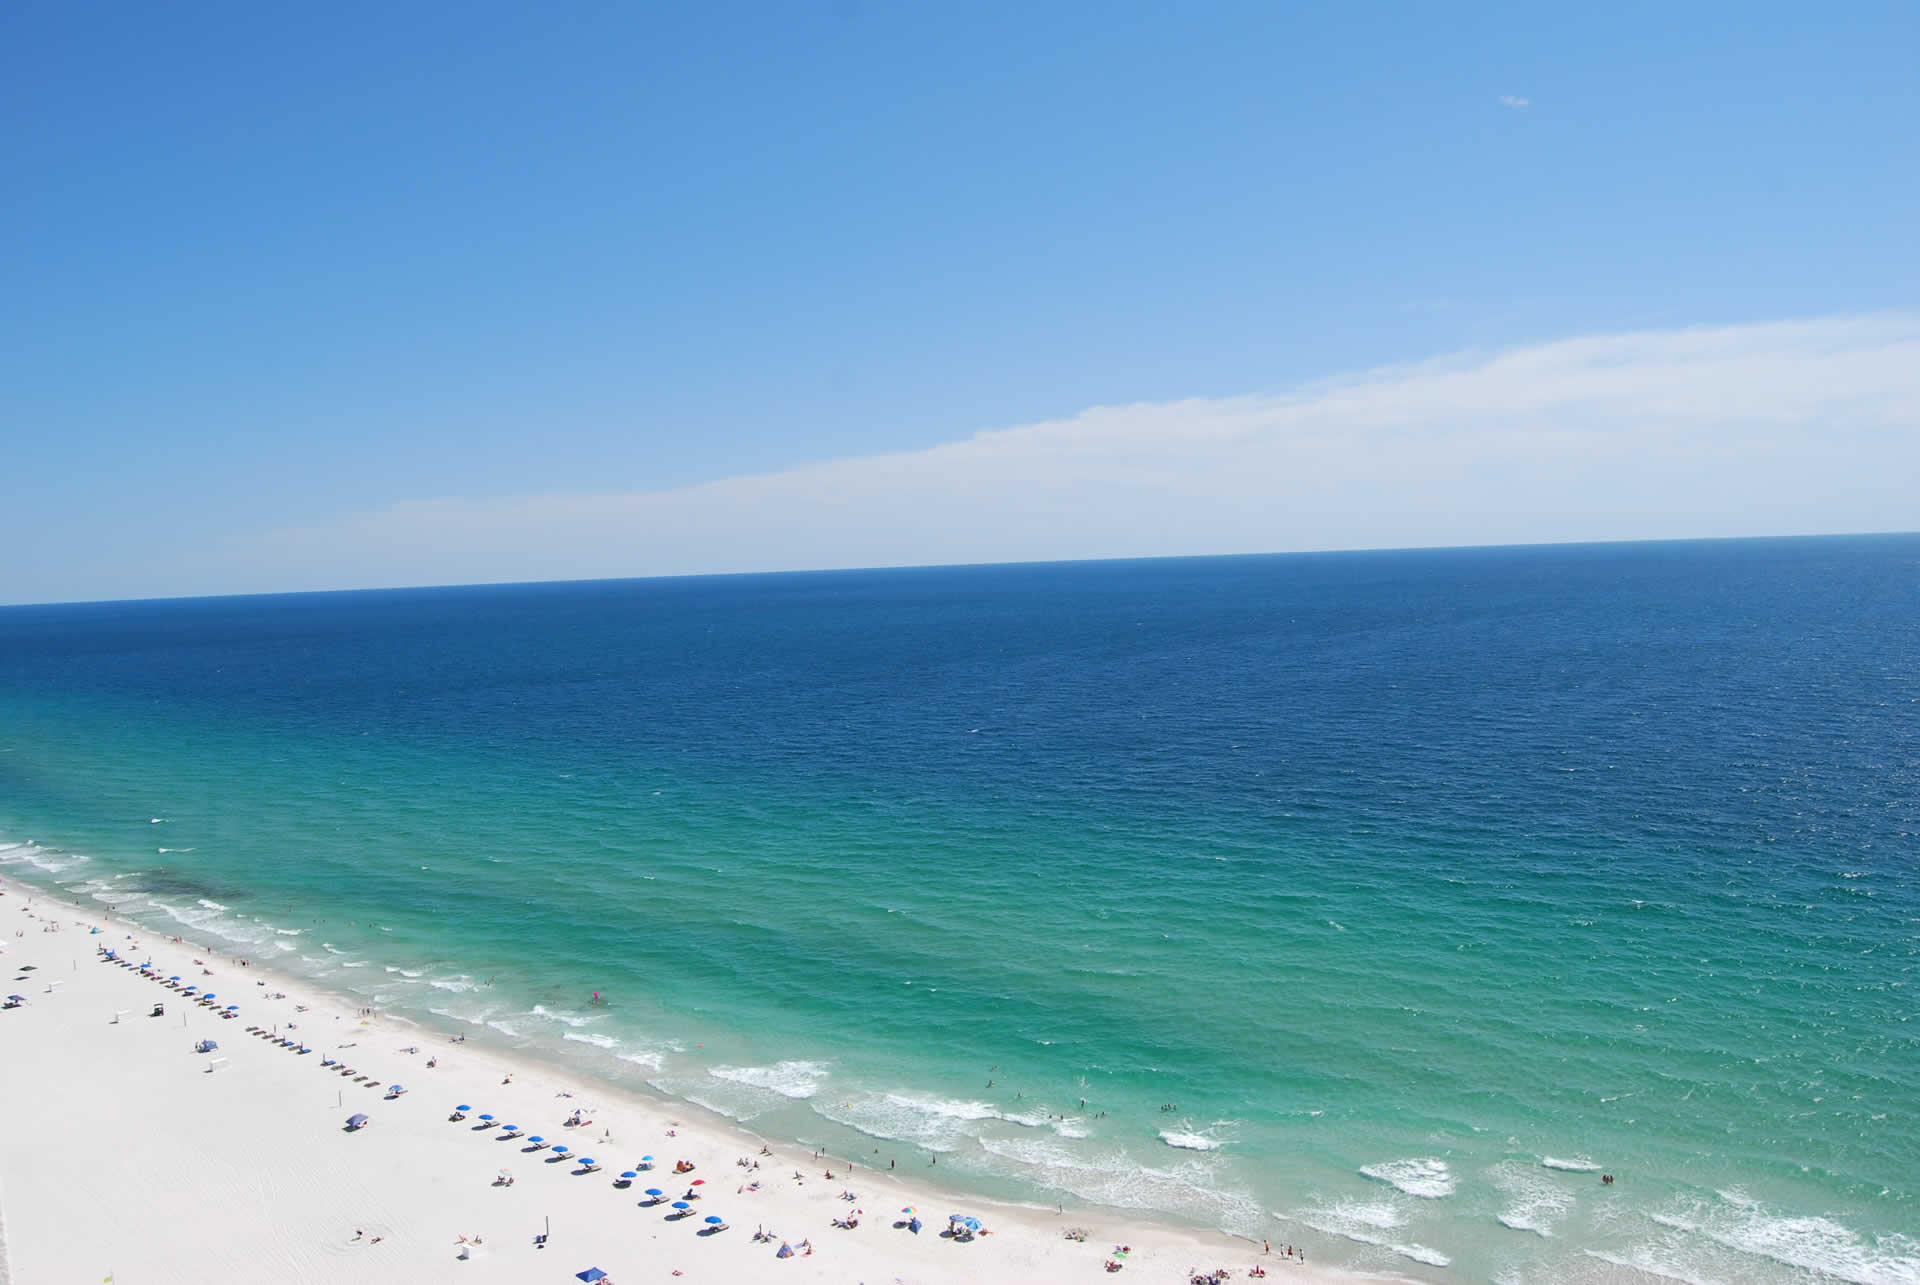 Poole Beach near our Gulf Shores Vacation Rentals